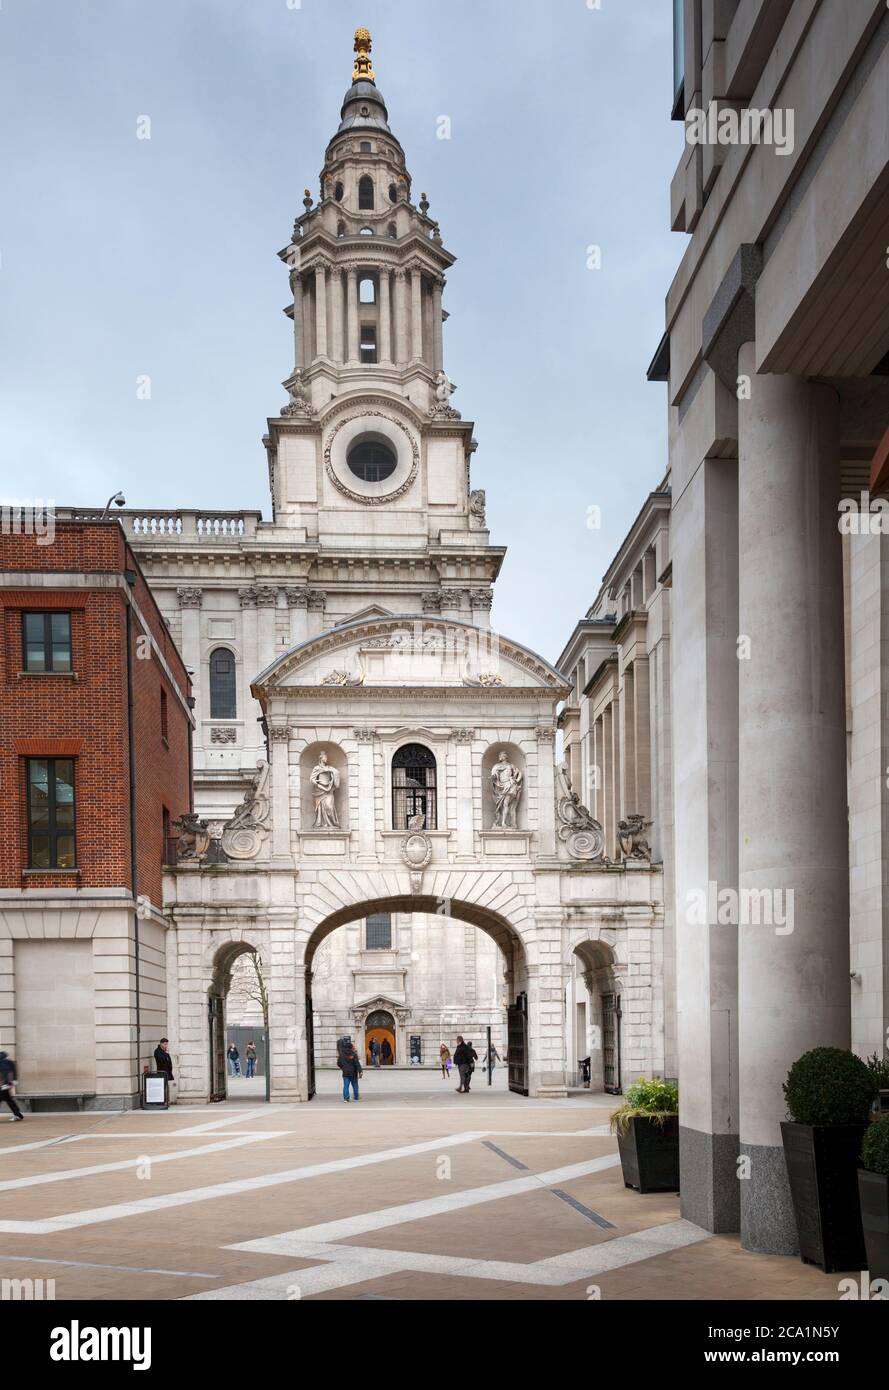 Temple Bar gate at Paternoster Square,City of London. The north-west corner of St Paul's Cathederal can be seen behind. Stock Photo